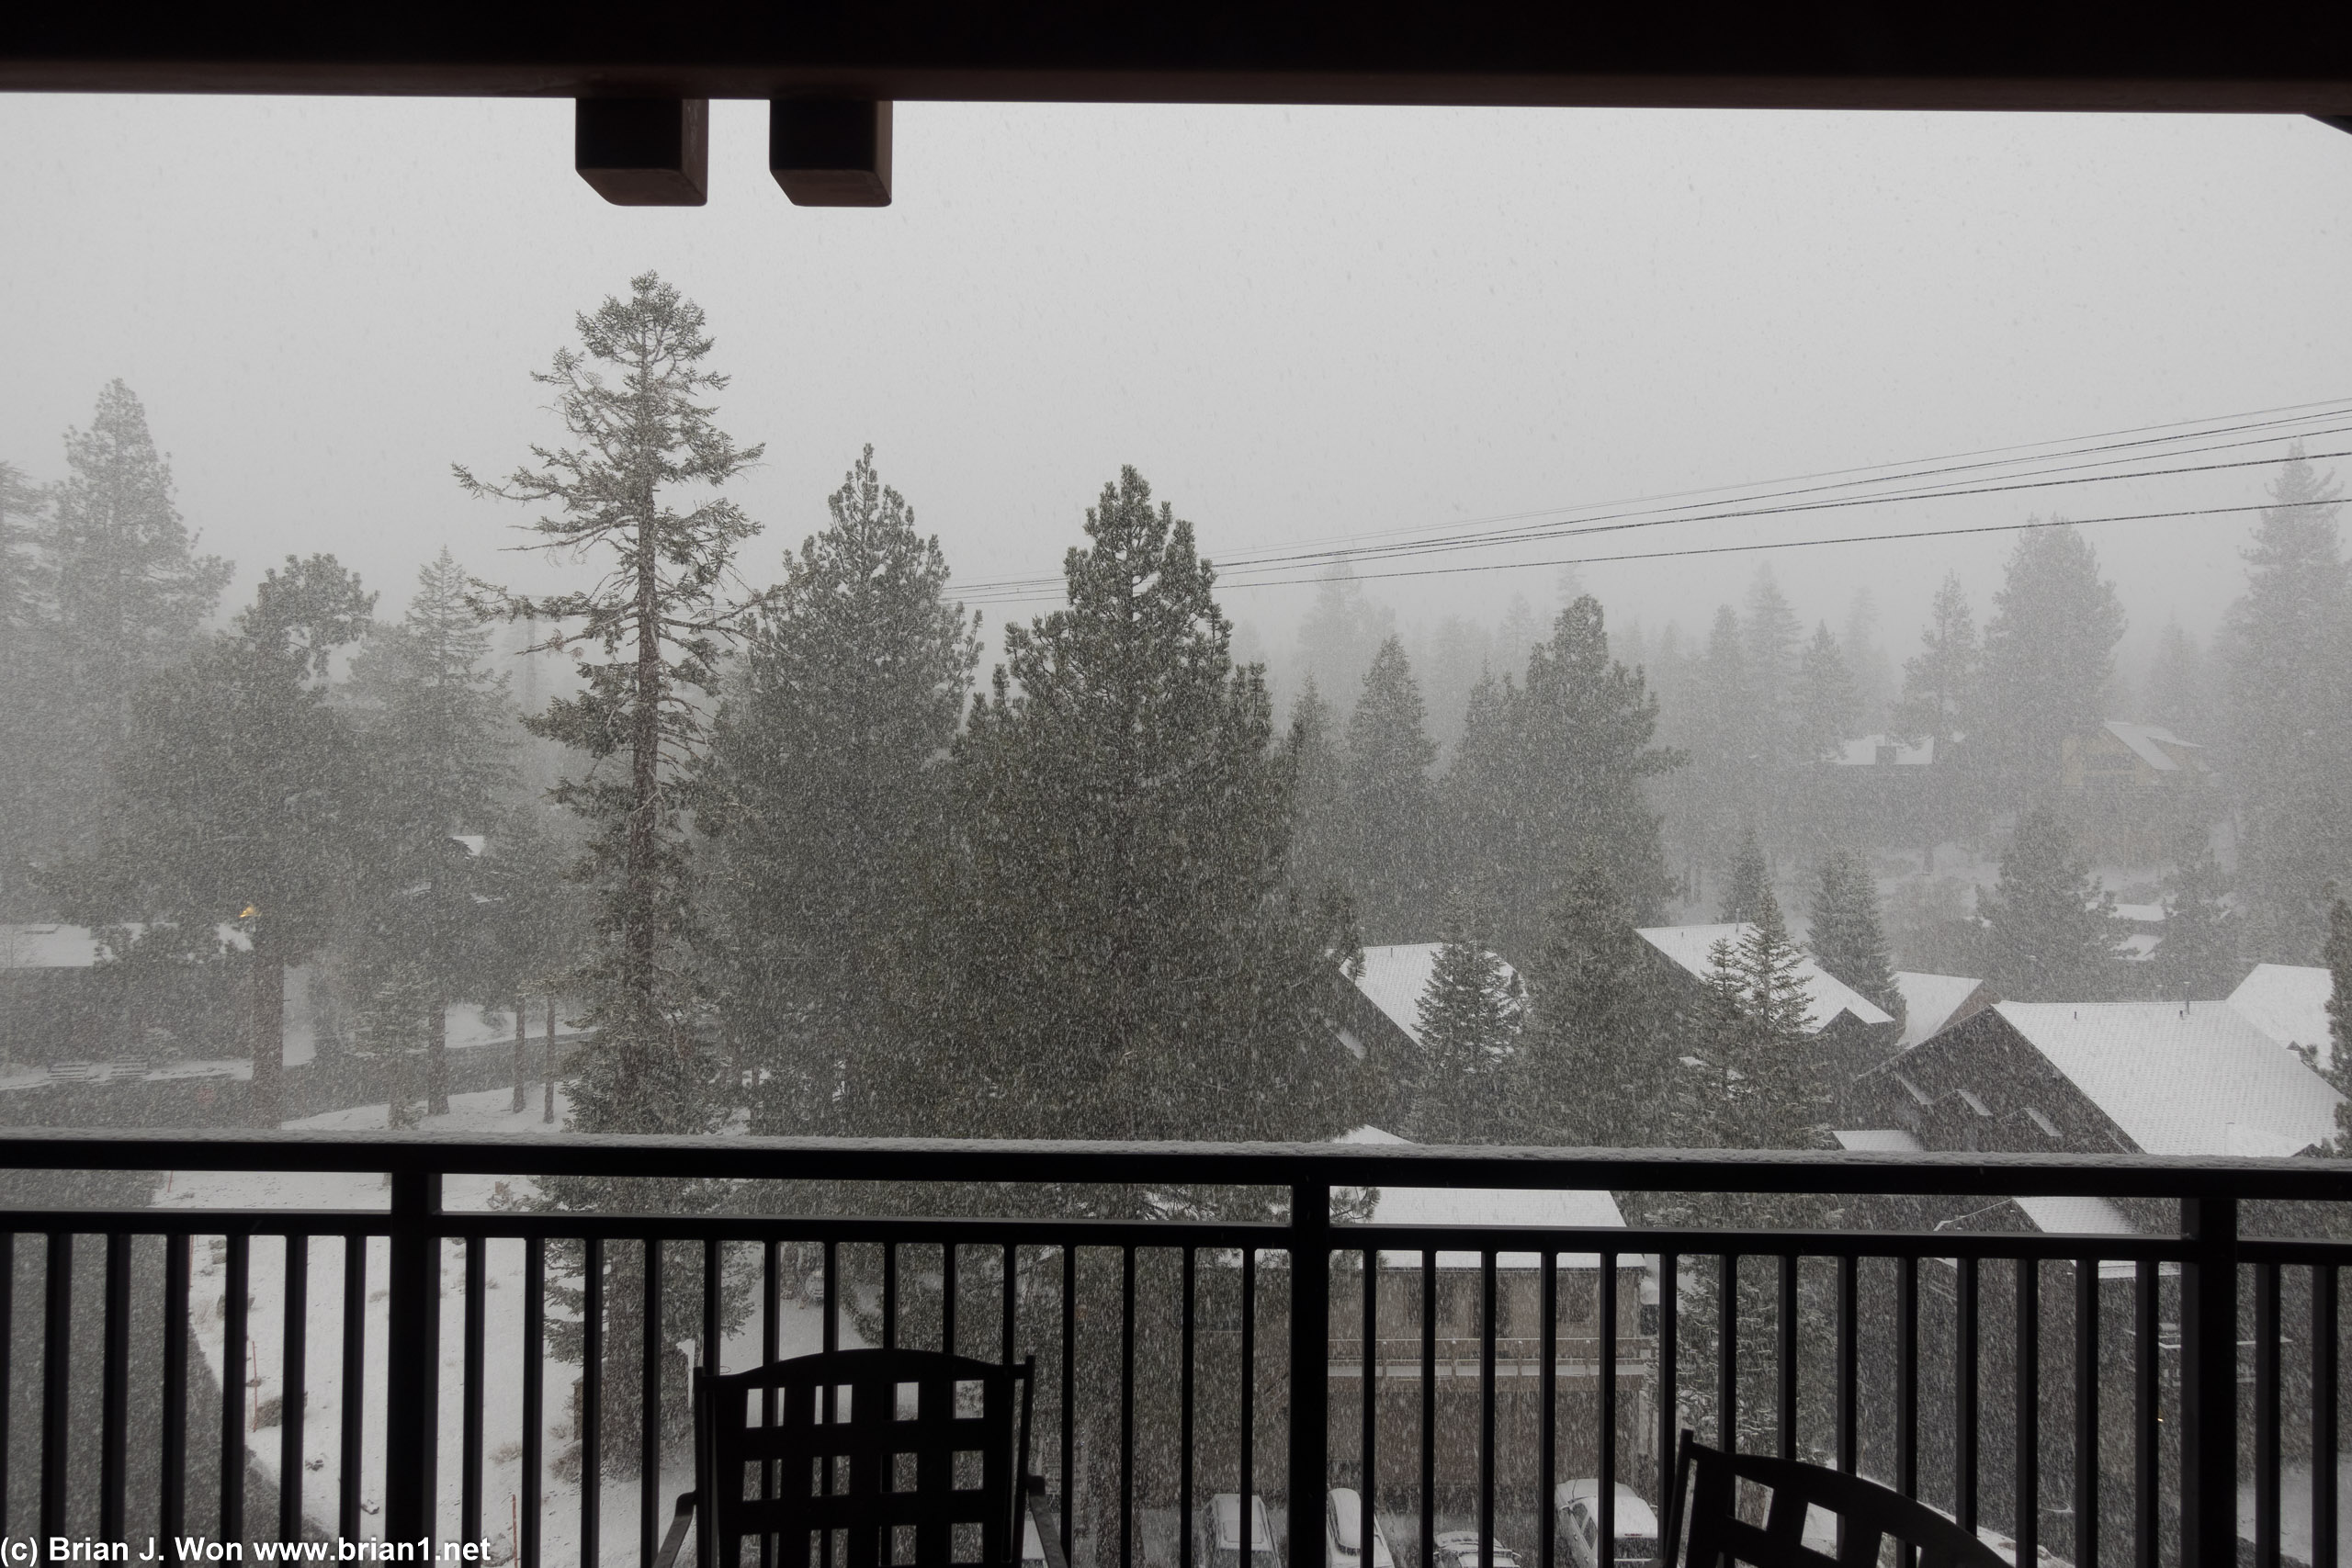 Snowing all day-- getting even heavier if anything at 5:30pm.